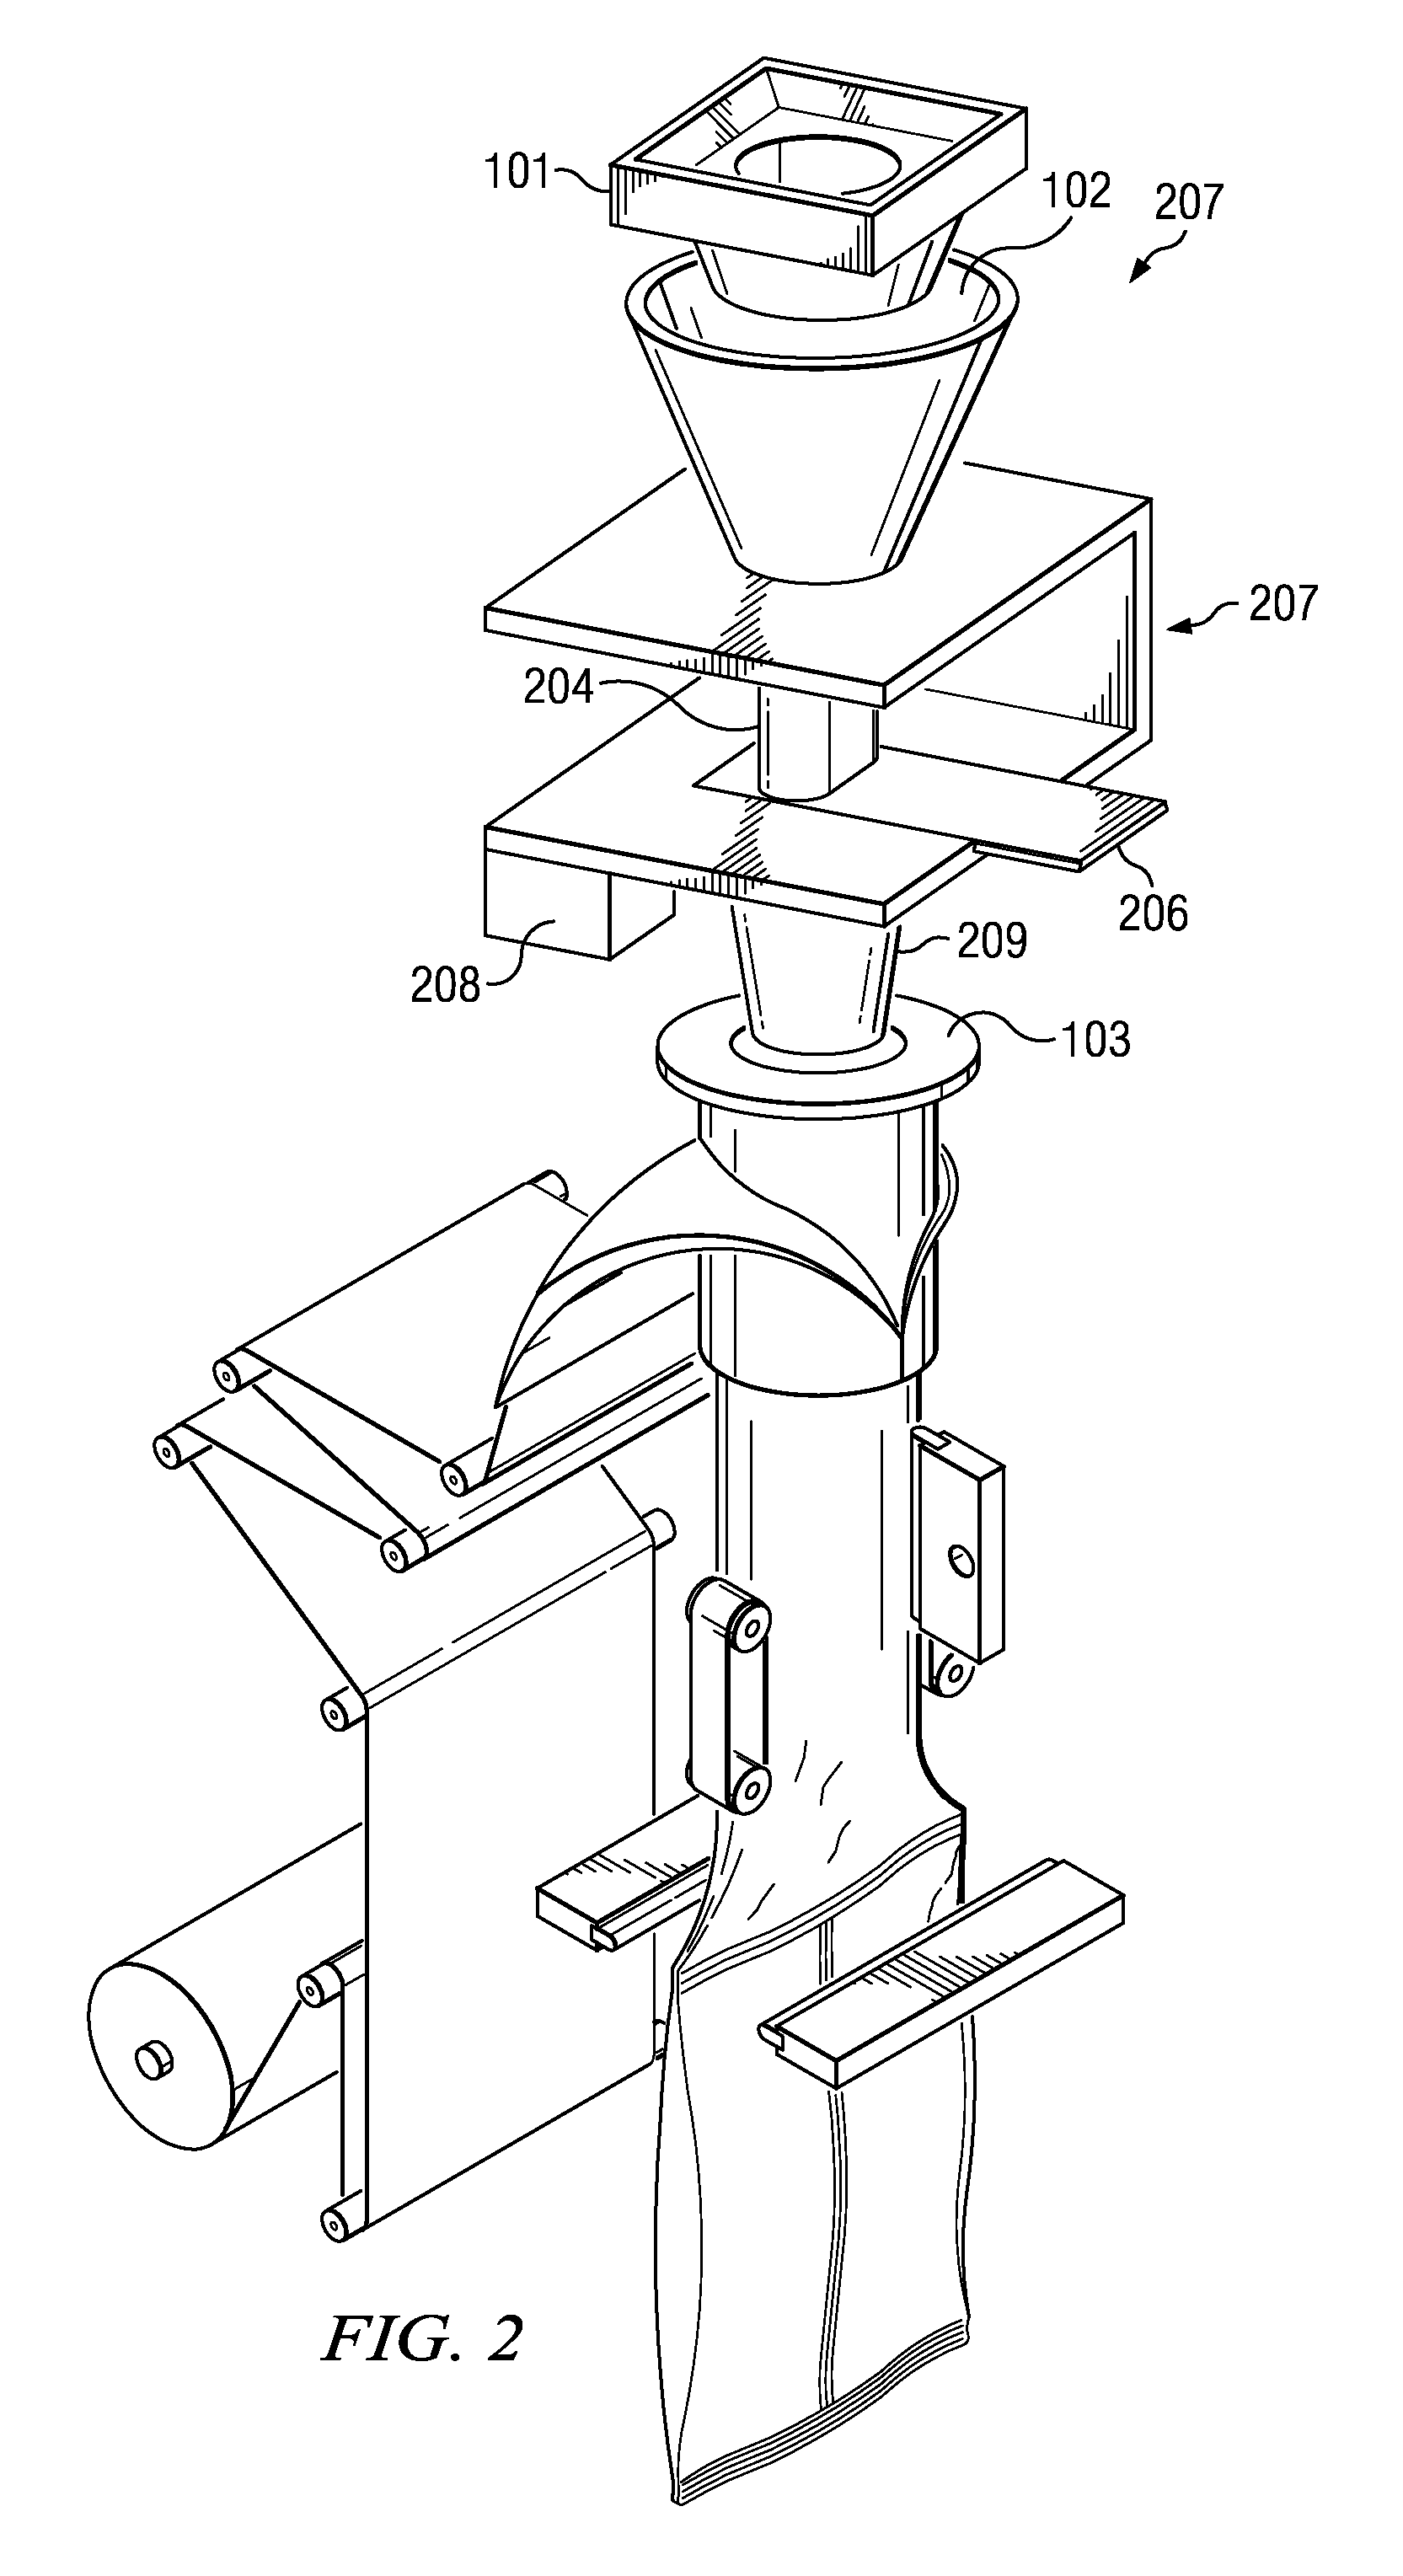 Method and apparatus for compacting product